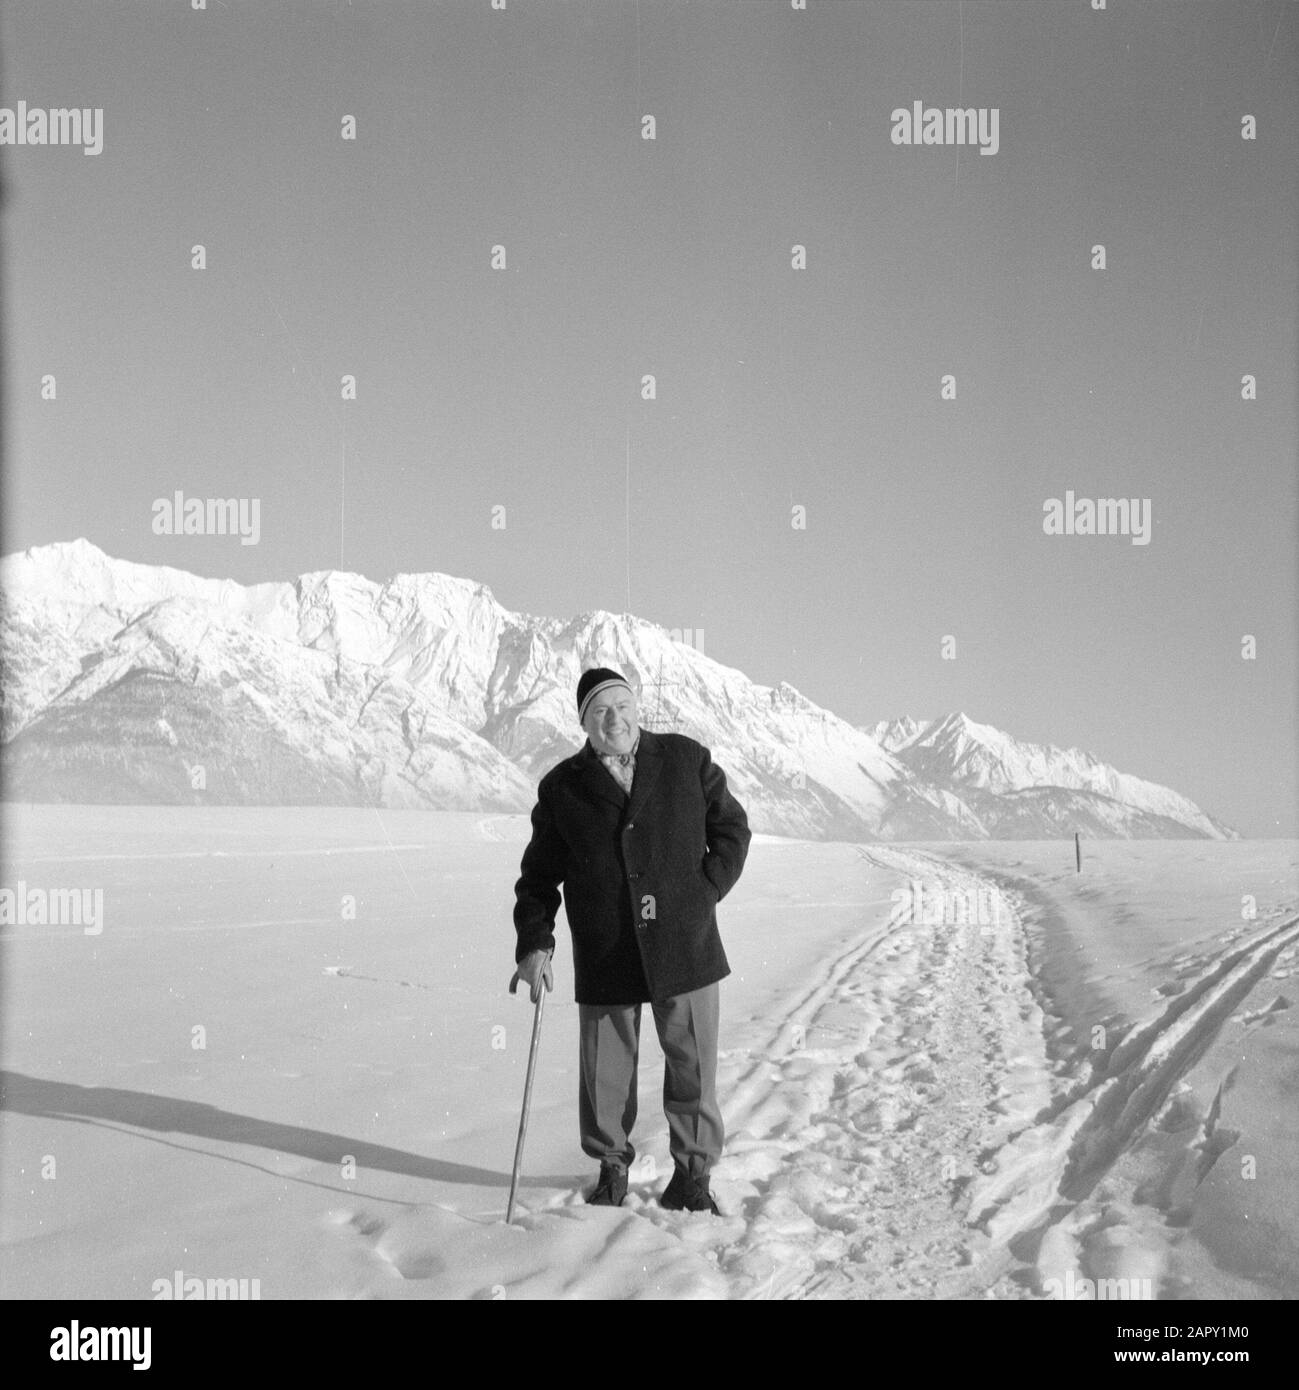 Winter in Tyrol  Willem van de Poll poses in the snow with in the background the Karwendel Mountains Date: January 1960 Location: Austria, Sistrans, Tyrol Keywords: mountains, landscapes, snow, holiday, hiking, winter Personal name: Poll, William of the Stock Photo